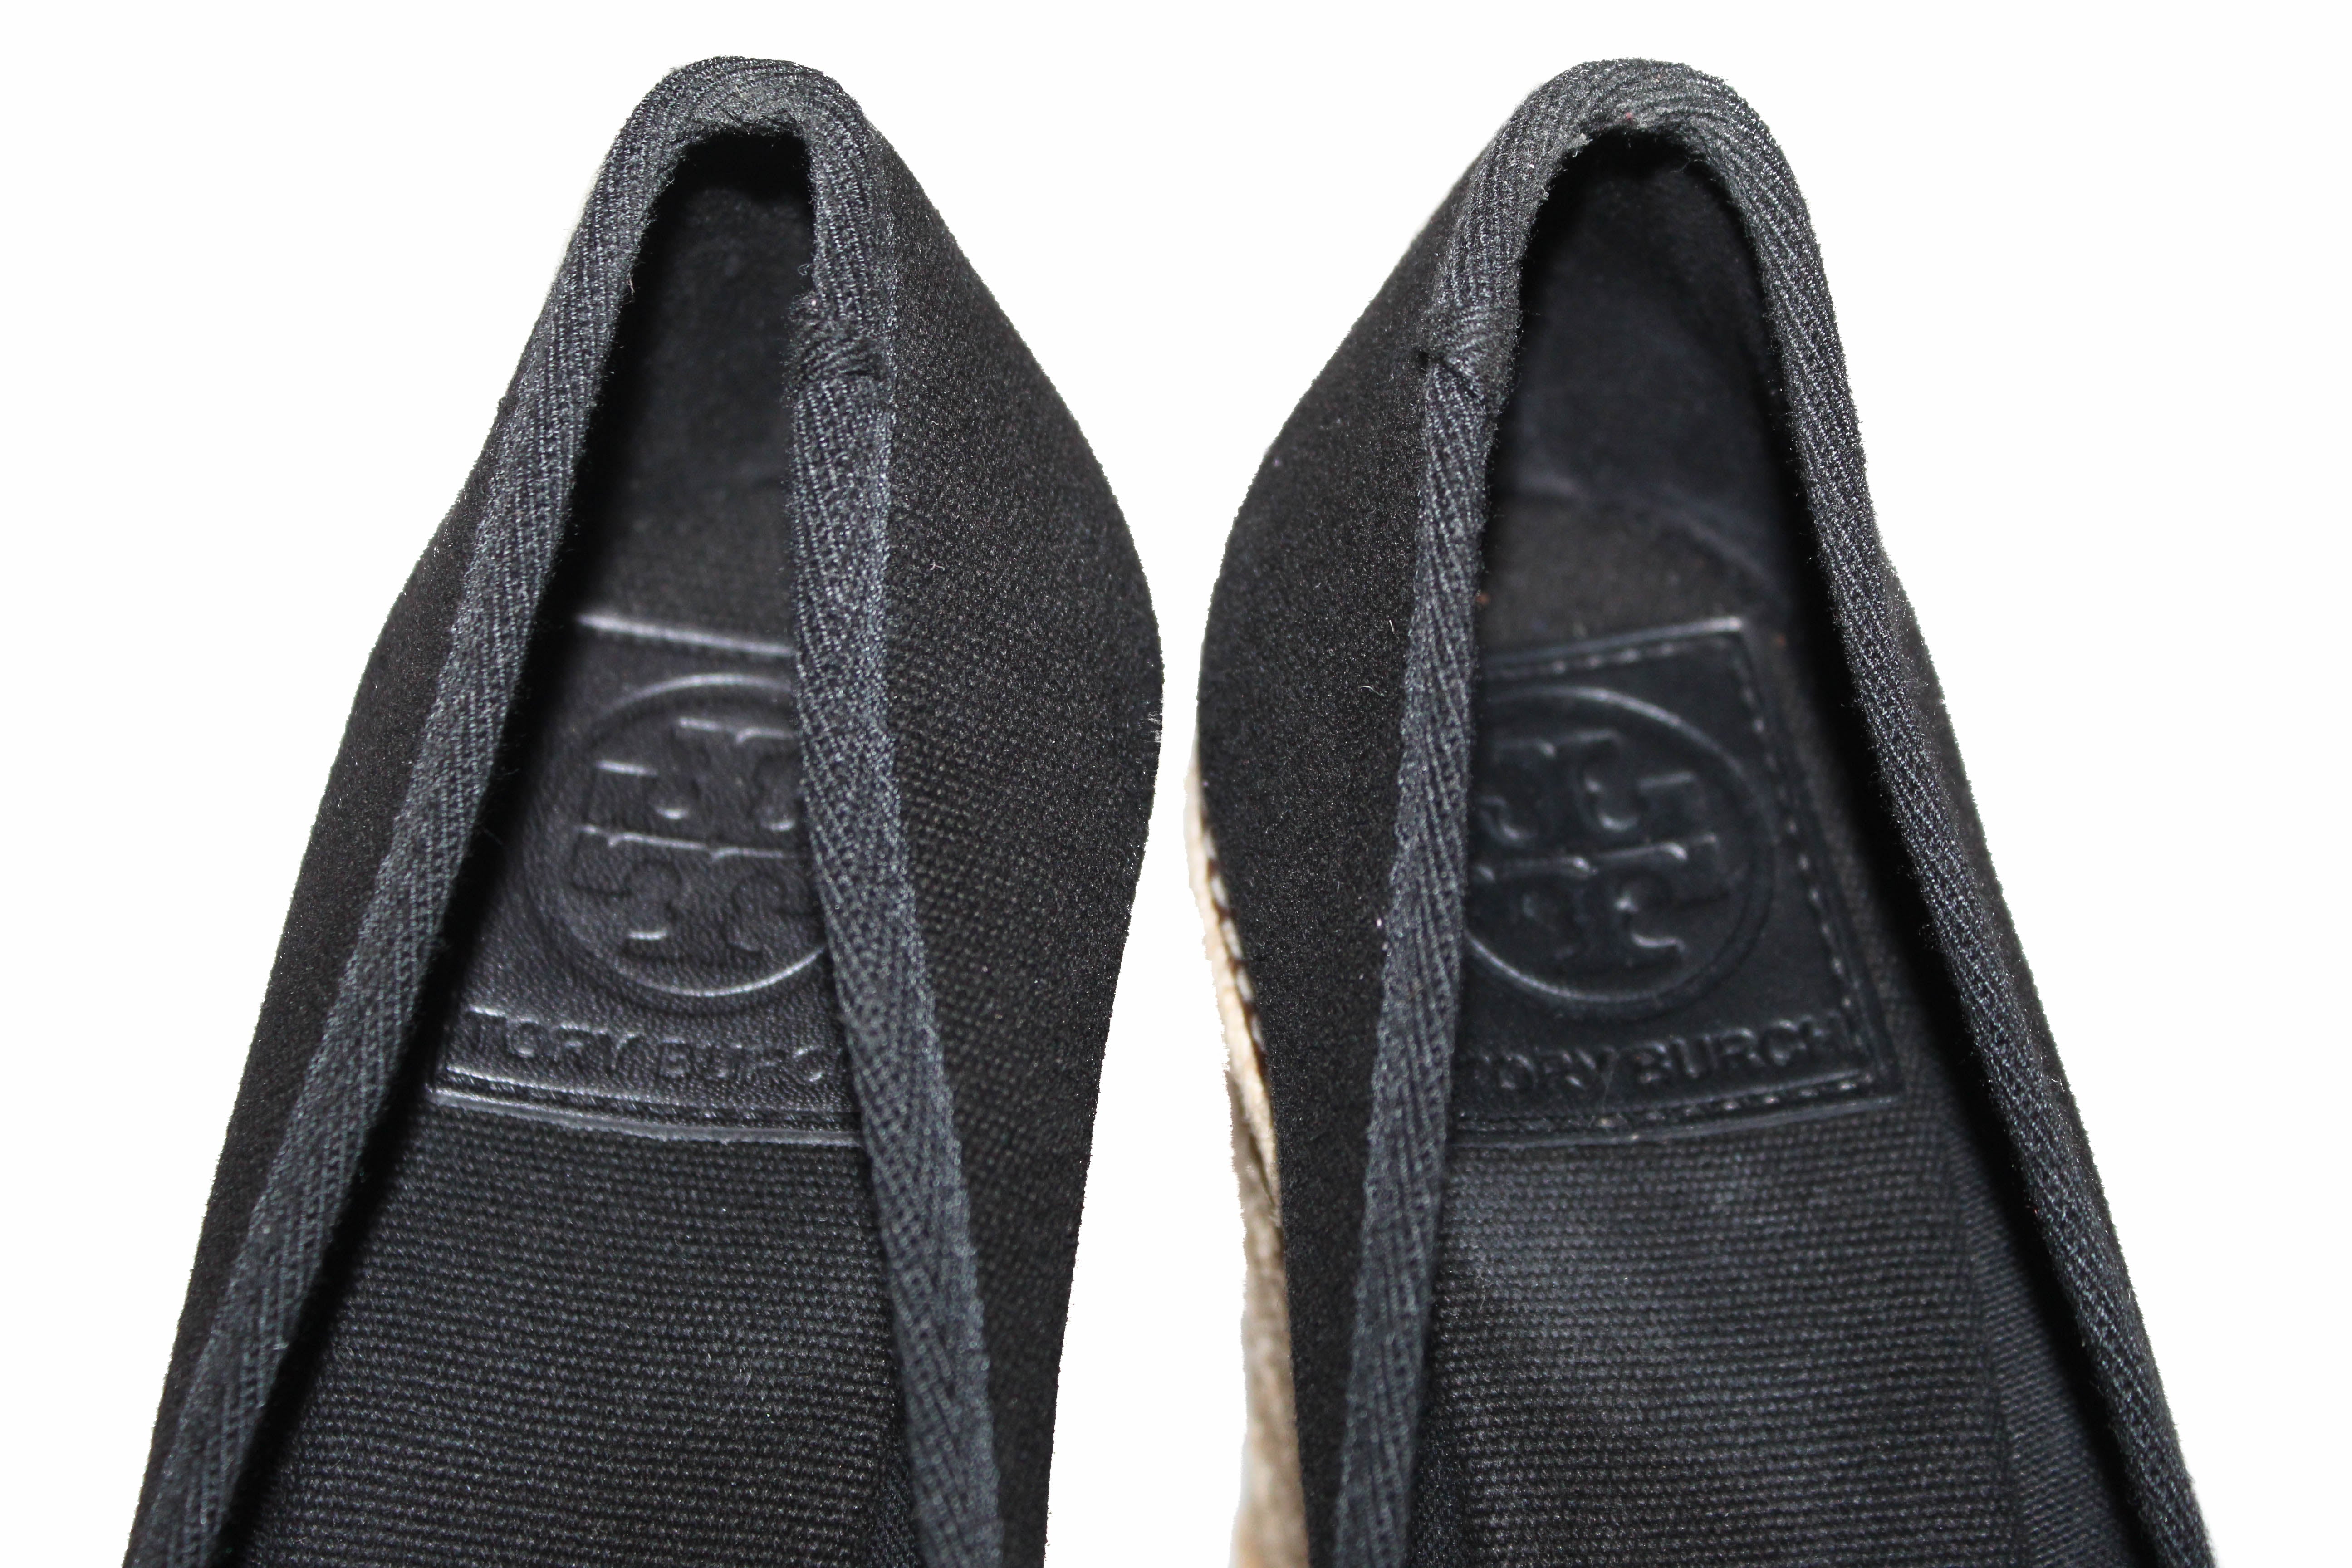 Authentic Tory Burch Black Canvas Jackie Espadrille 110mm Wedge Shoes Size 7